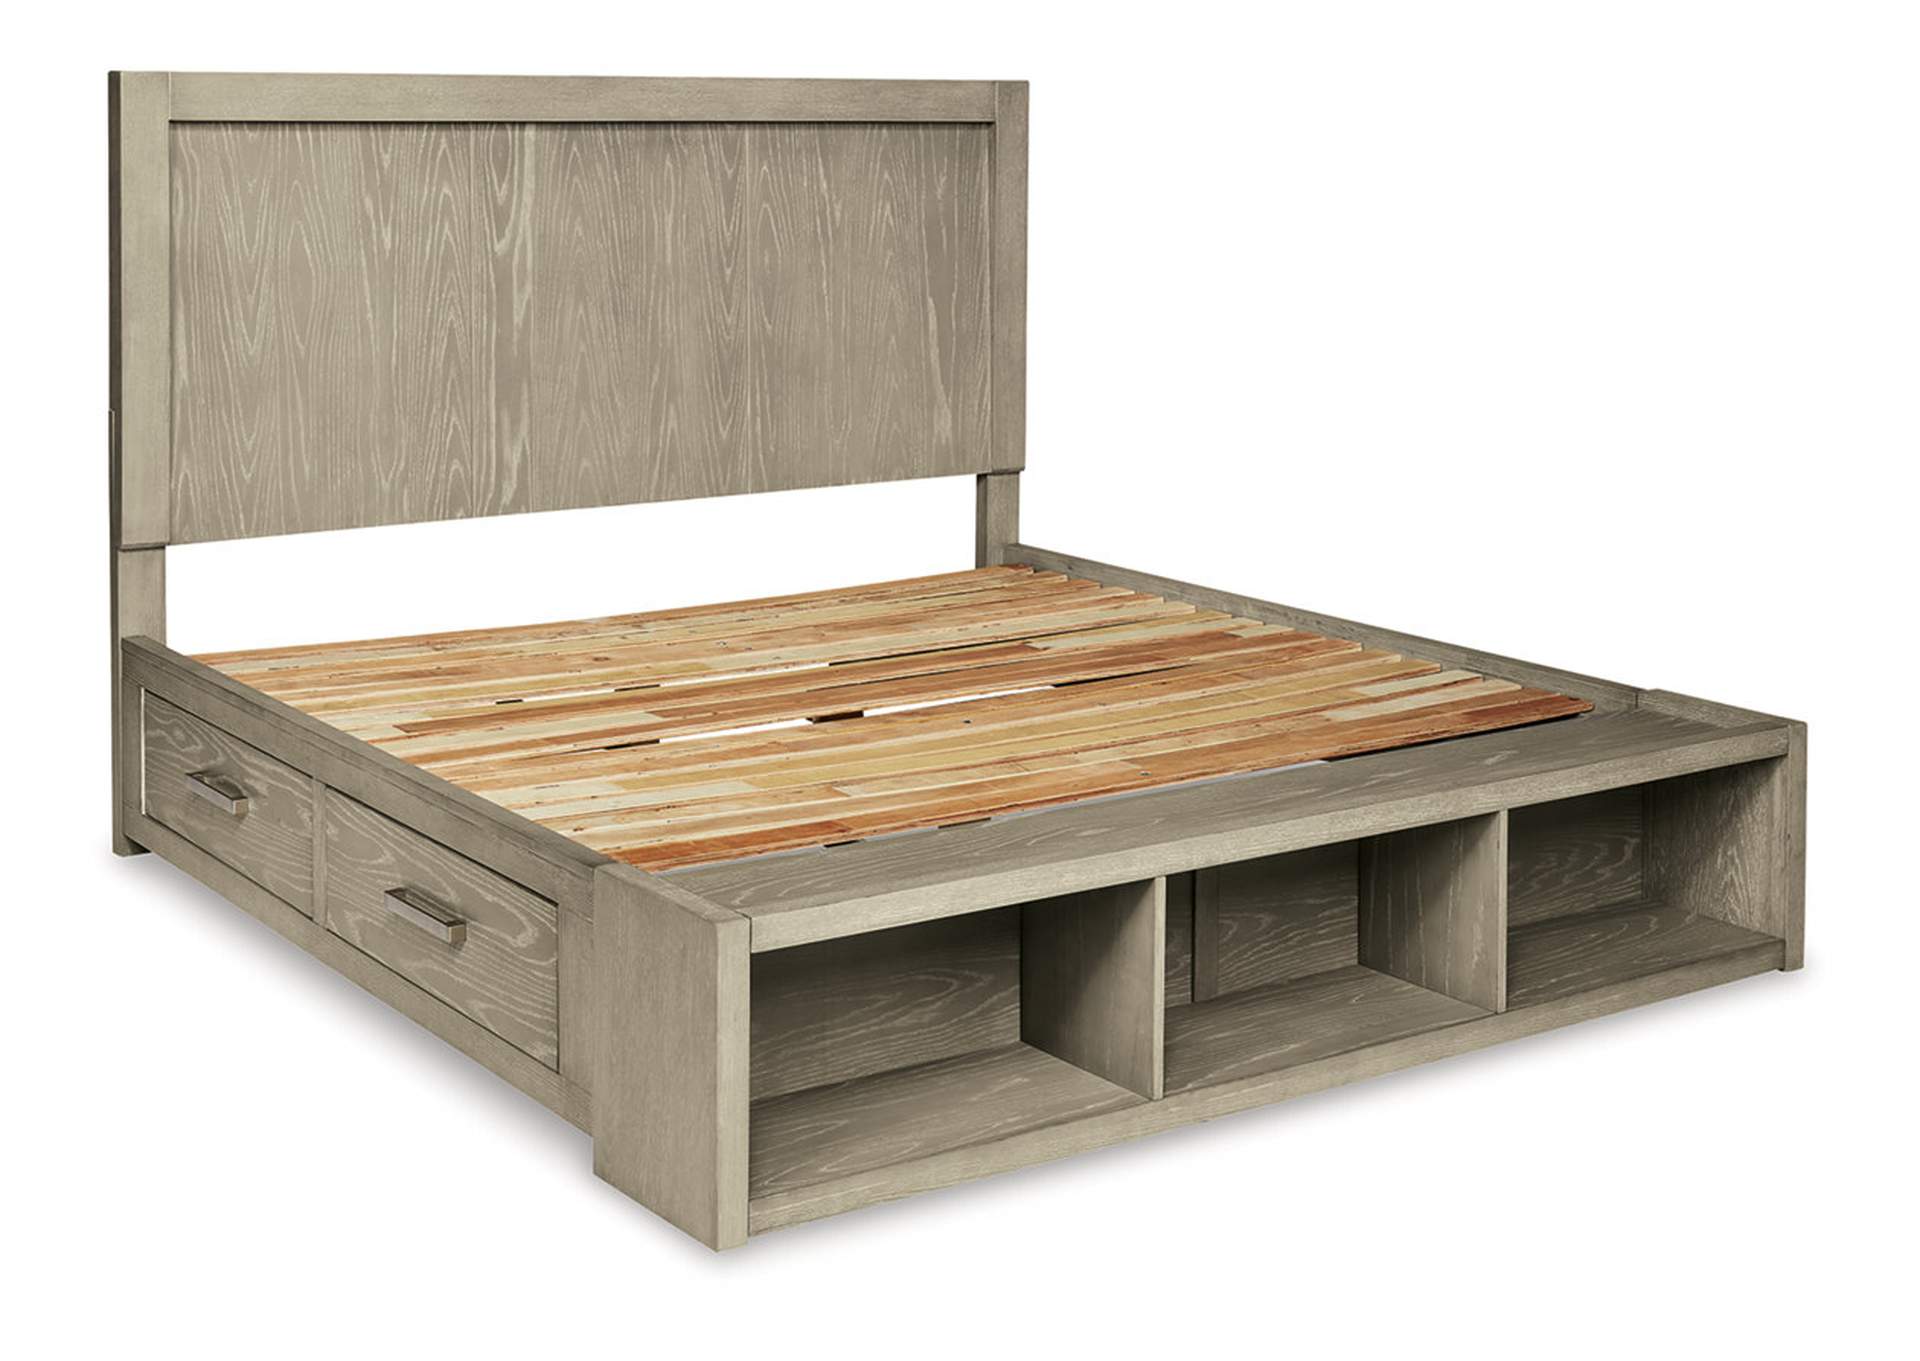 Fawnburg California King Panel Bed with Storage,Millennium